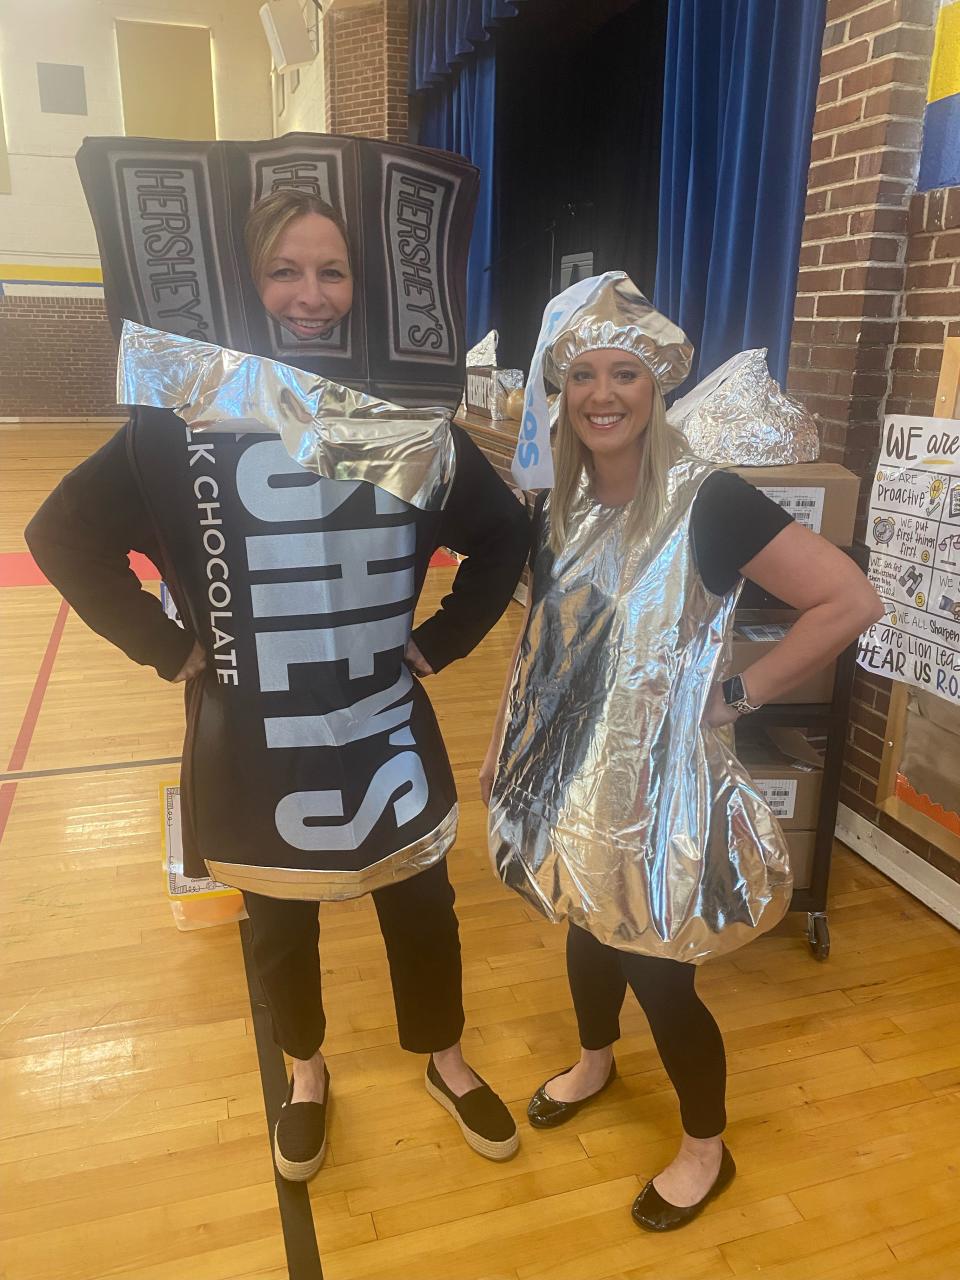 Lynn Jacomen (left), who was the Inskip Elementary principal last year, and Megan Blevins, who was her assistant, always managed to have fun.